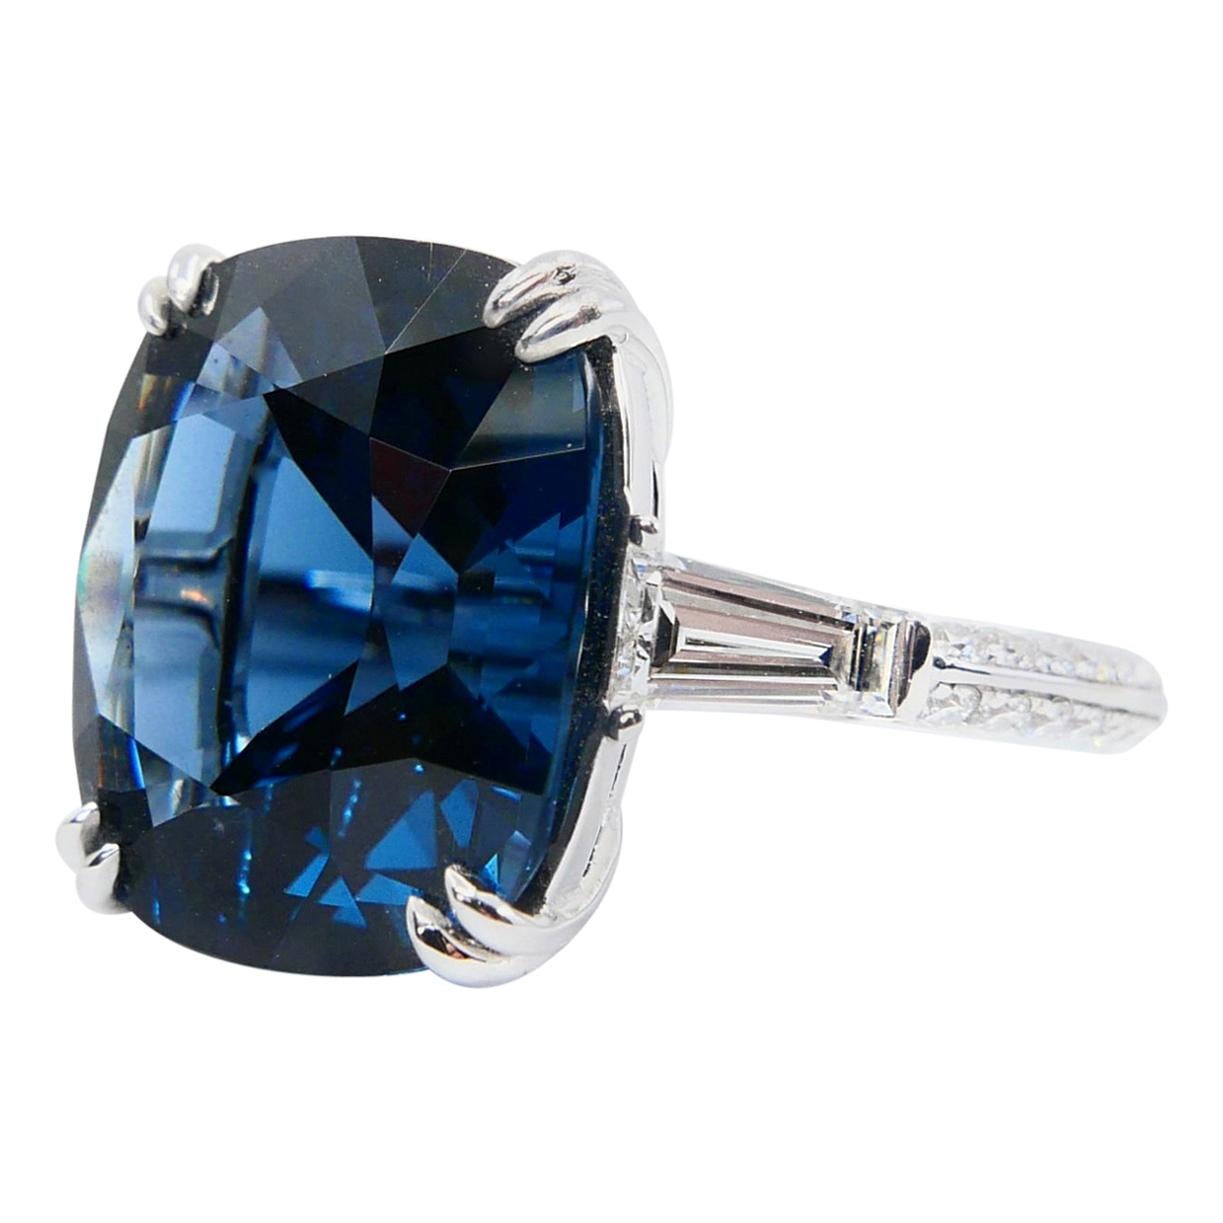 Contemporary Important Certified 10.10 Carat Cobalt Spinel Diamond Cocktail Ring. Exquisite.